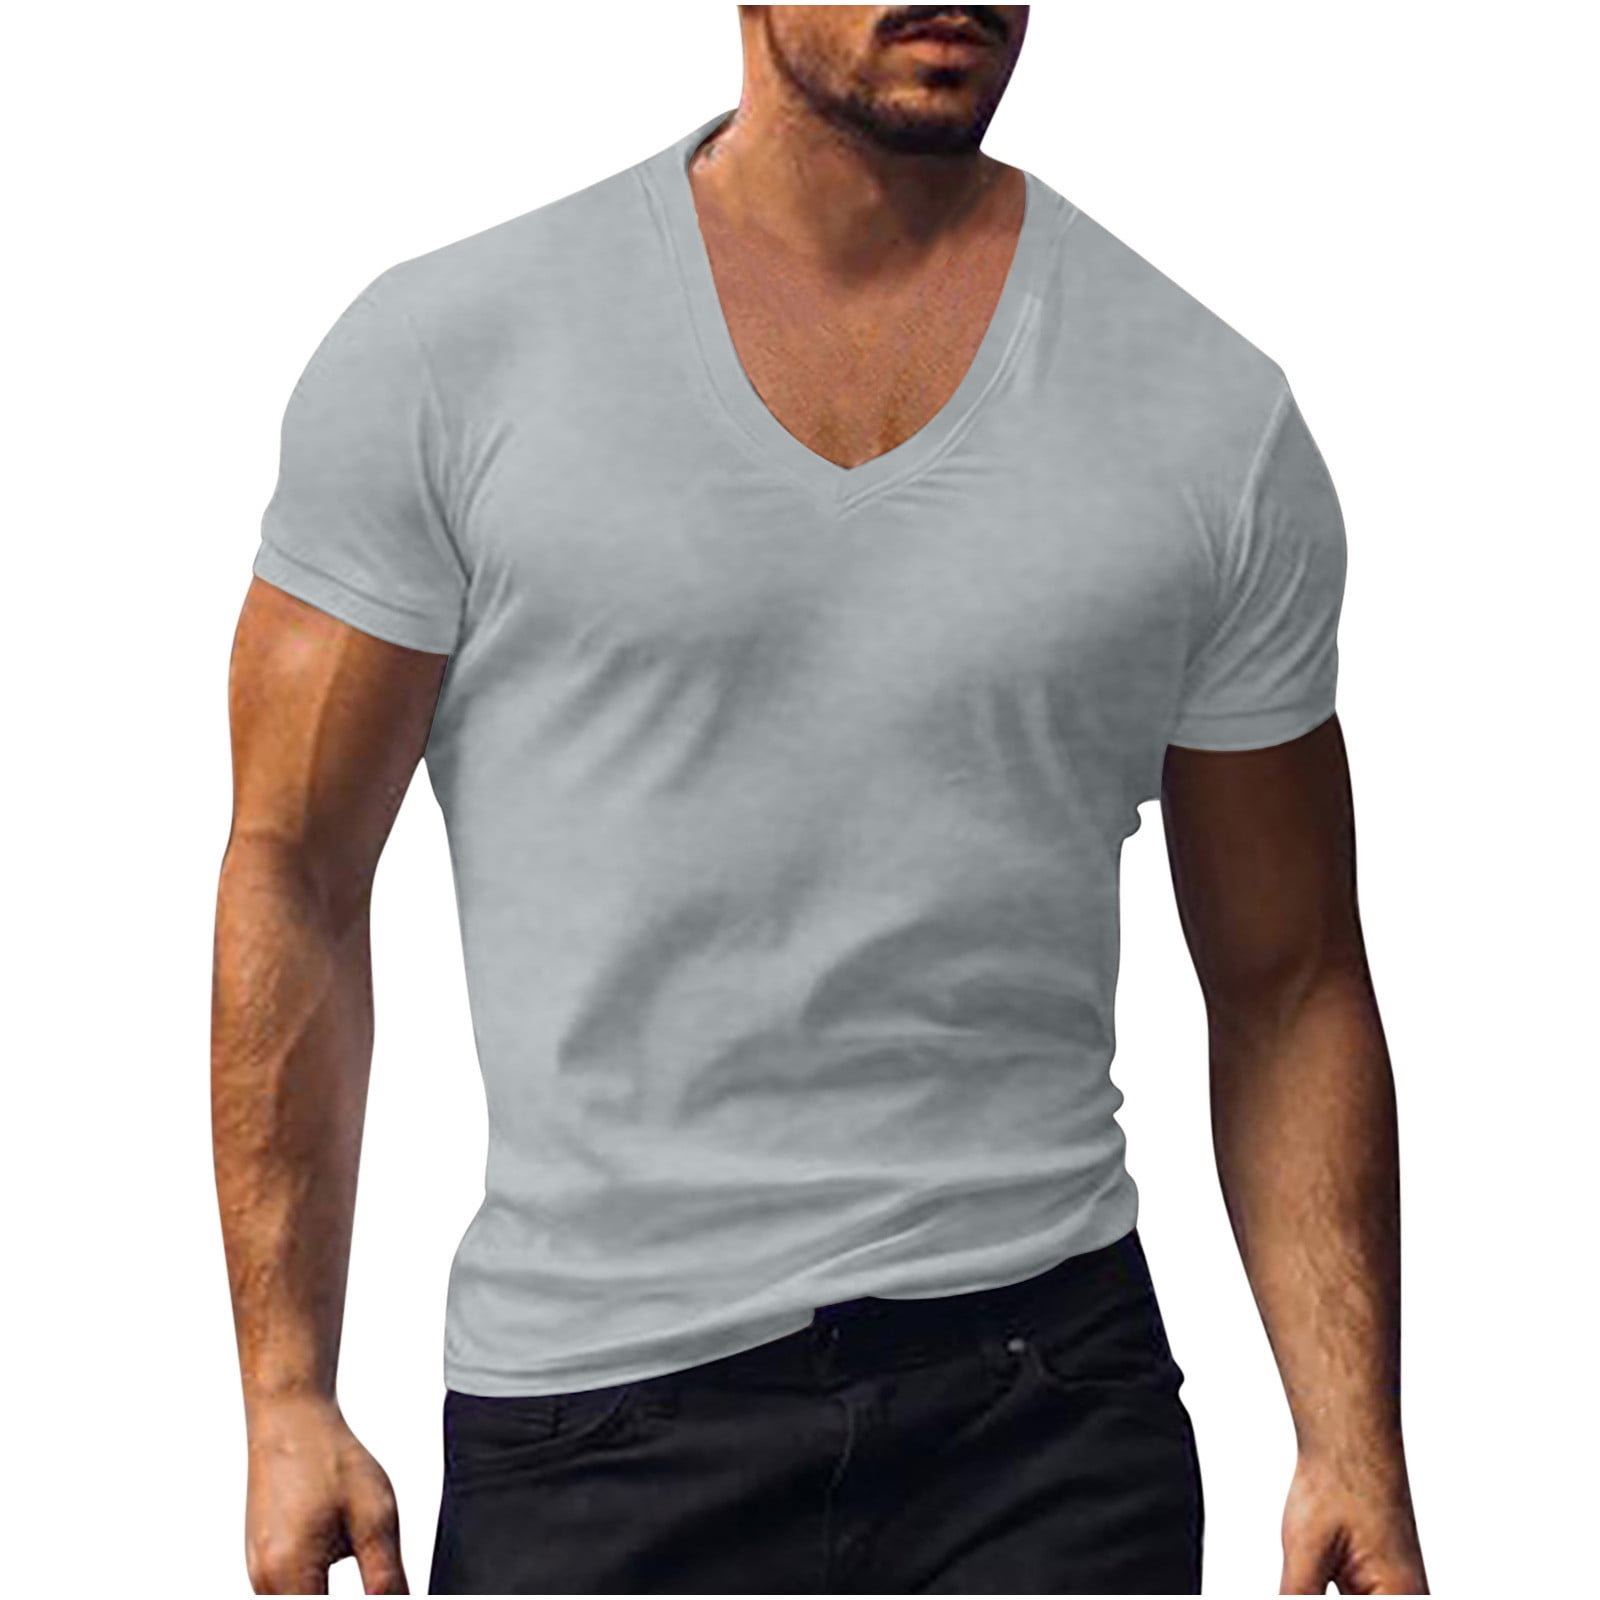 Plus Size Cotton Training Shirts for Men Solid Moisture Wicking Muscle ...